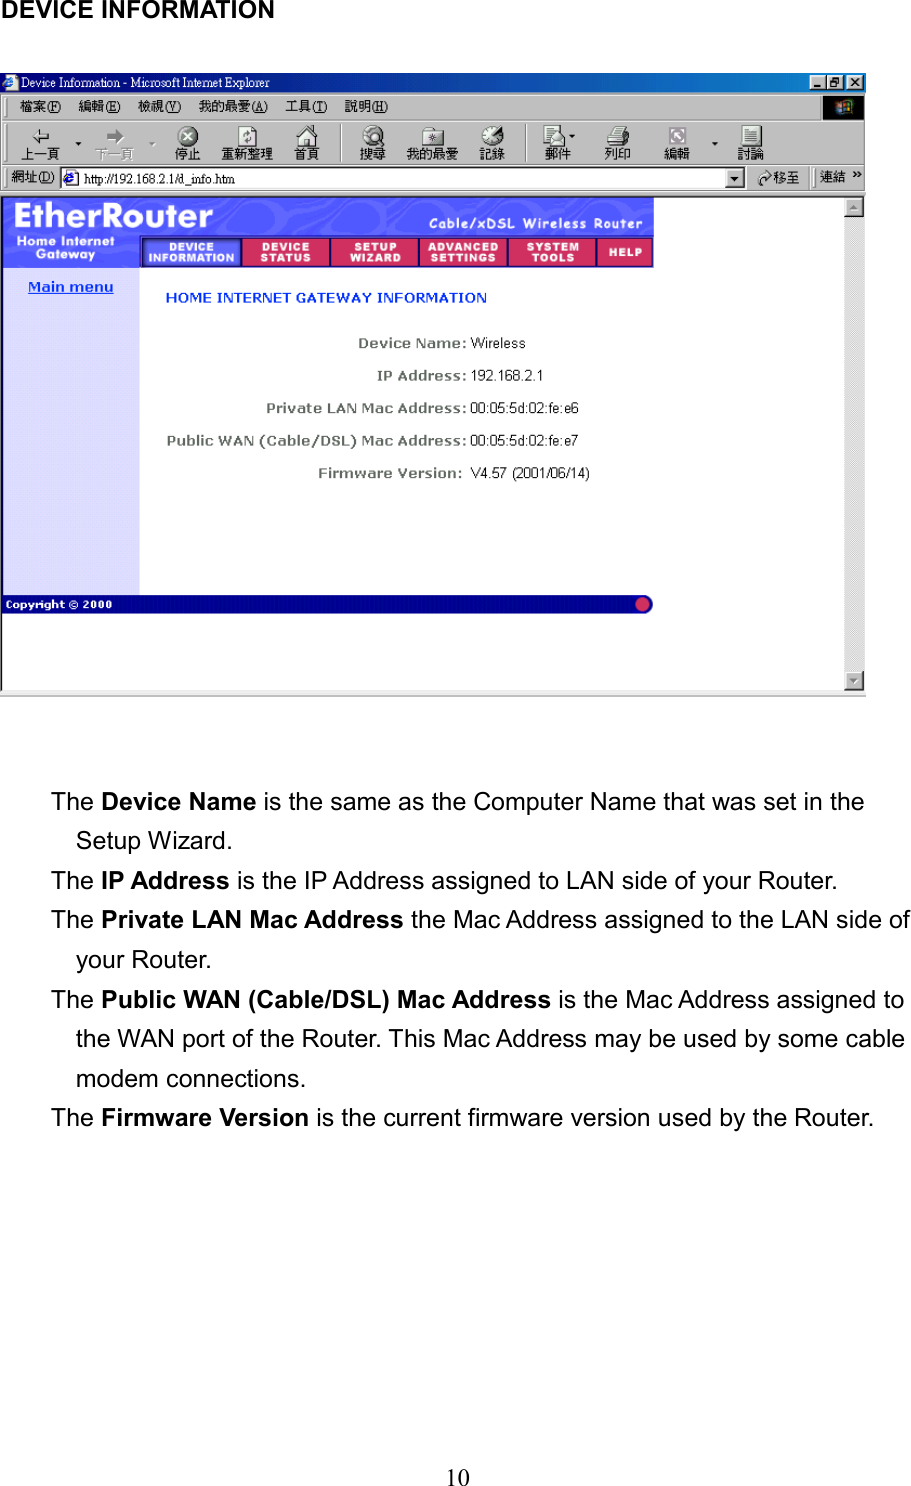  10 DEVICE INFORMATION     The Device Name is the same as the Computer Name that was set in the Setup Wizard.   The IP Address is the IP Address assigned to LAN side of your Router.   The Private LAN Mac Address the Mac Address assigned to the LAN side of your Router.   The Public WAN (Cable/DSL) Mac Address is the Mac Address assigned to the WAN port of the Router. This Mac Address may be used by some cable modem connections. The Firmware Version is the current firmware version used by the Router.         